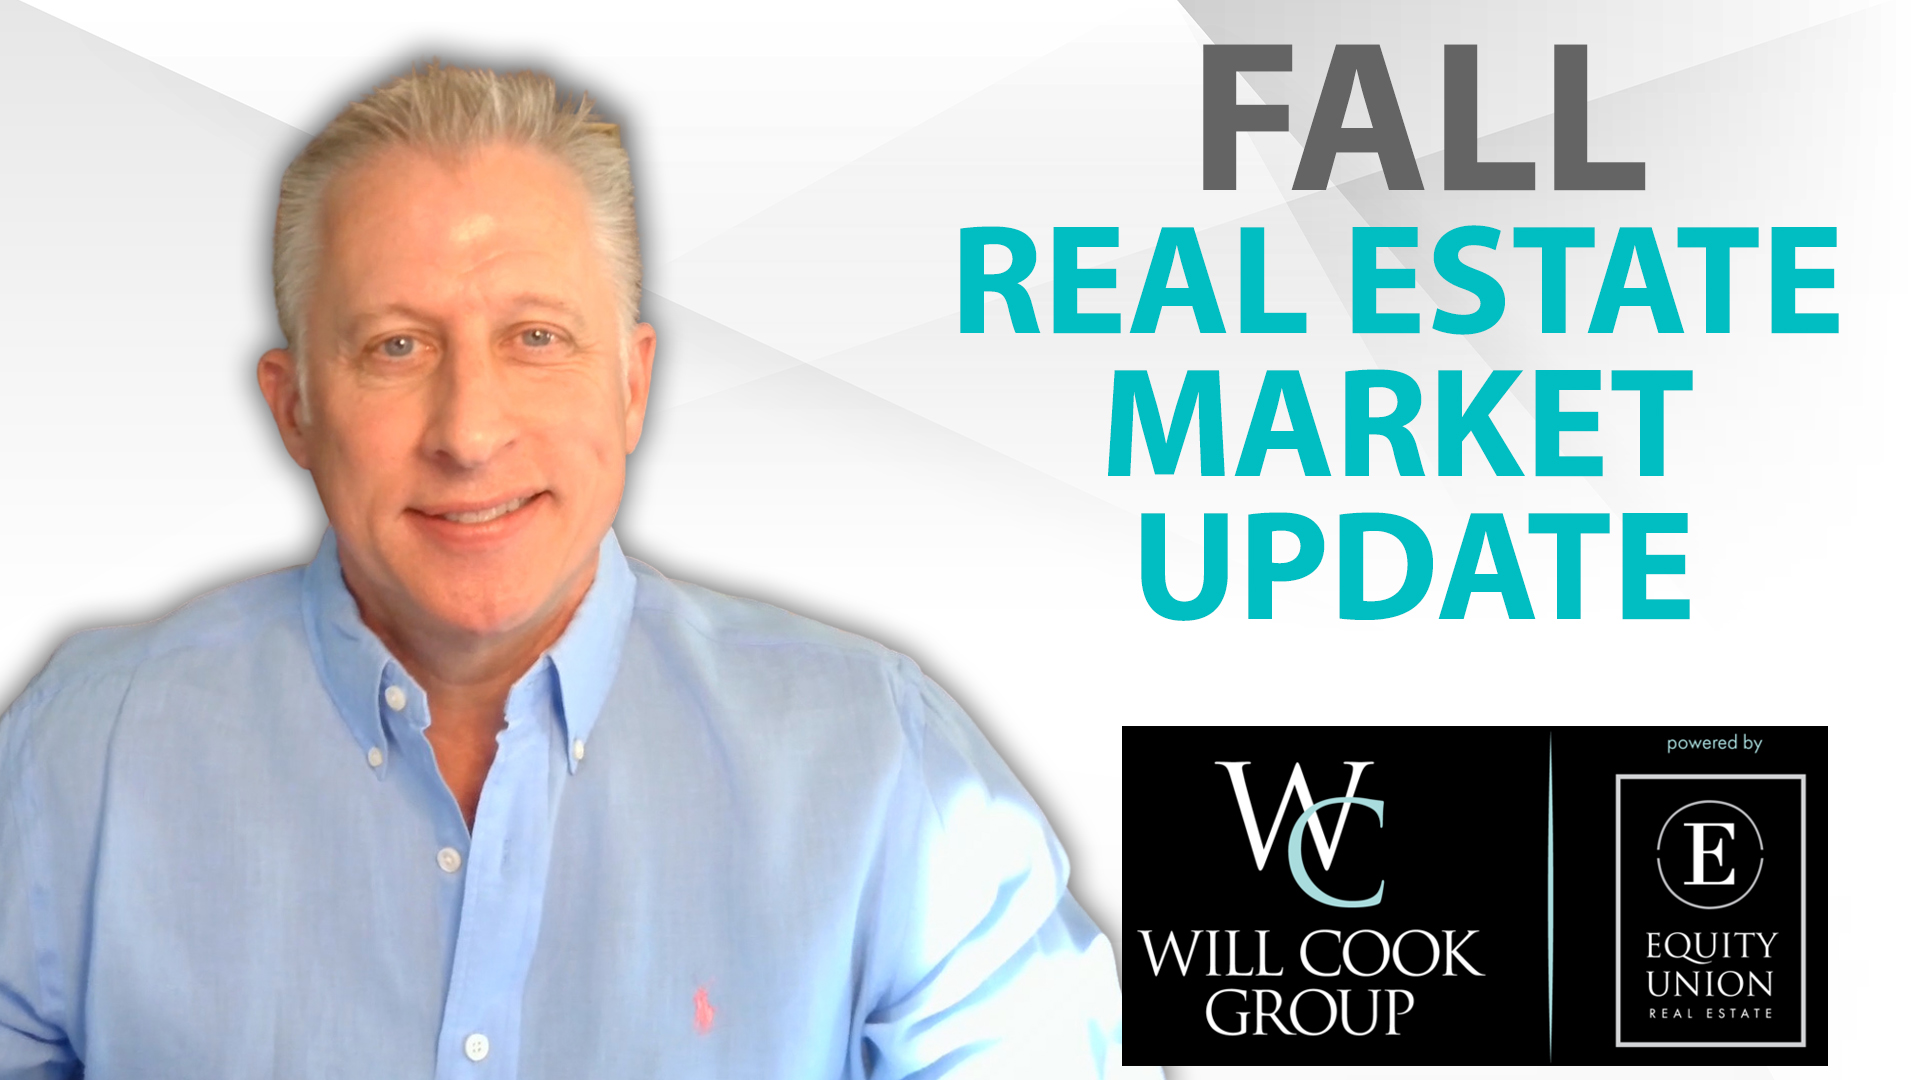 Fall Real Estate Market Update: What's Happening in the Greater Palm Springs Area